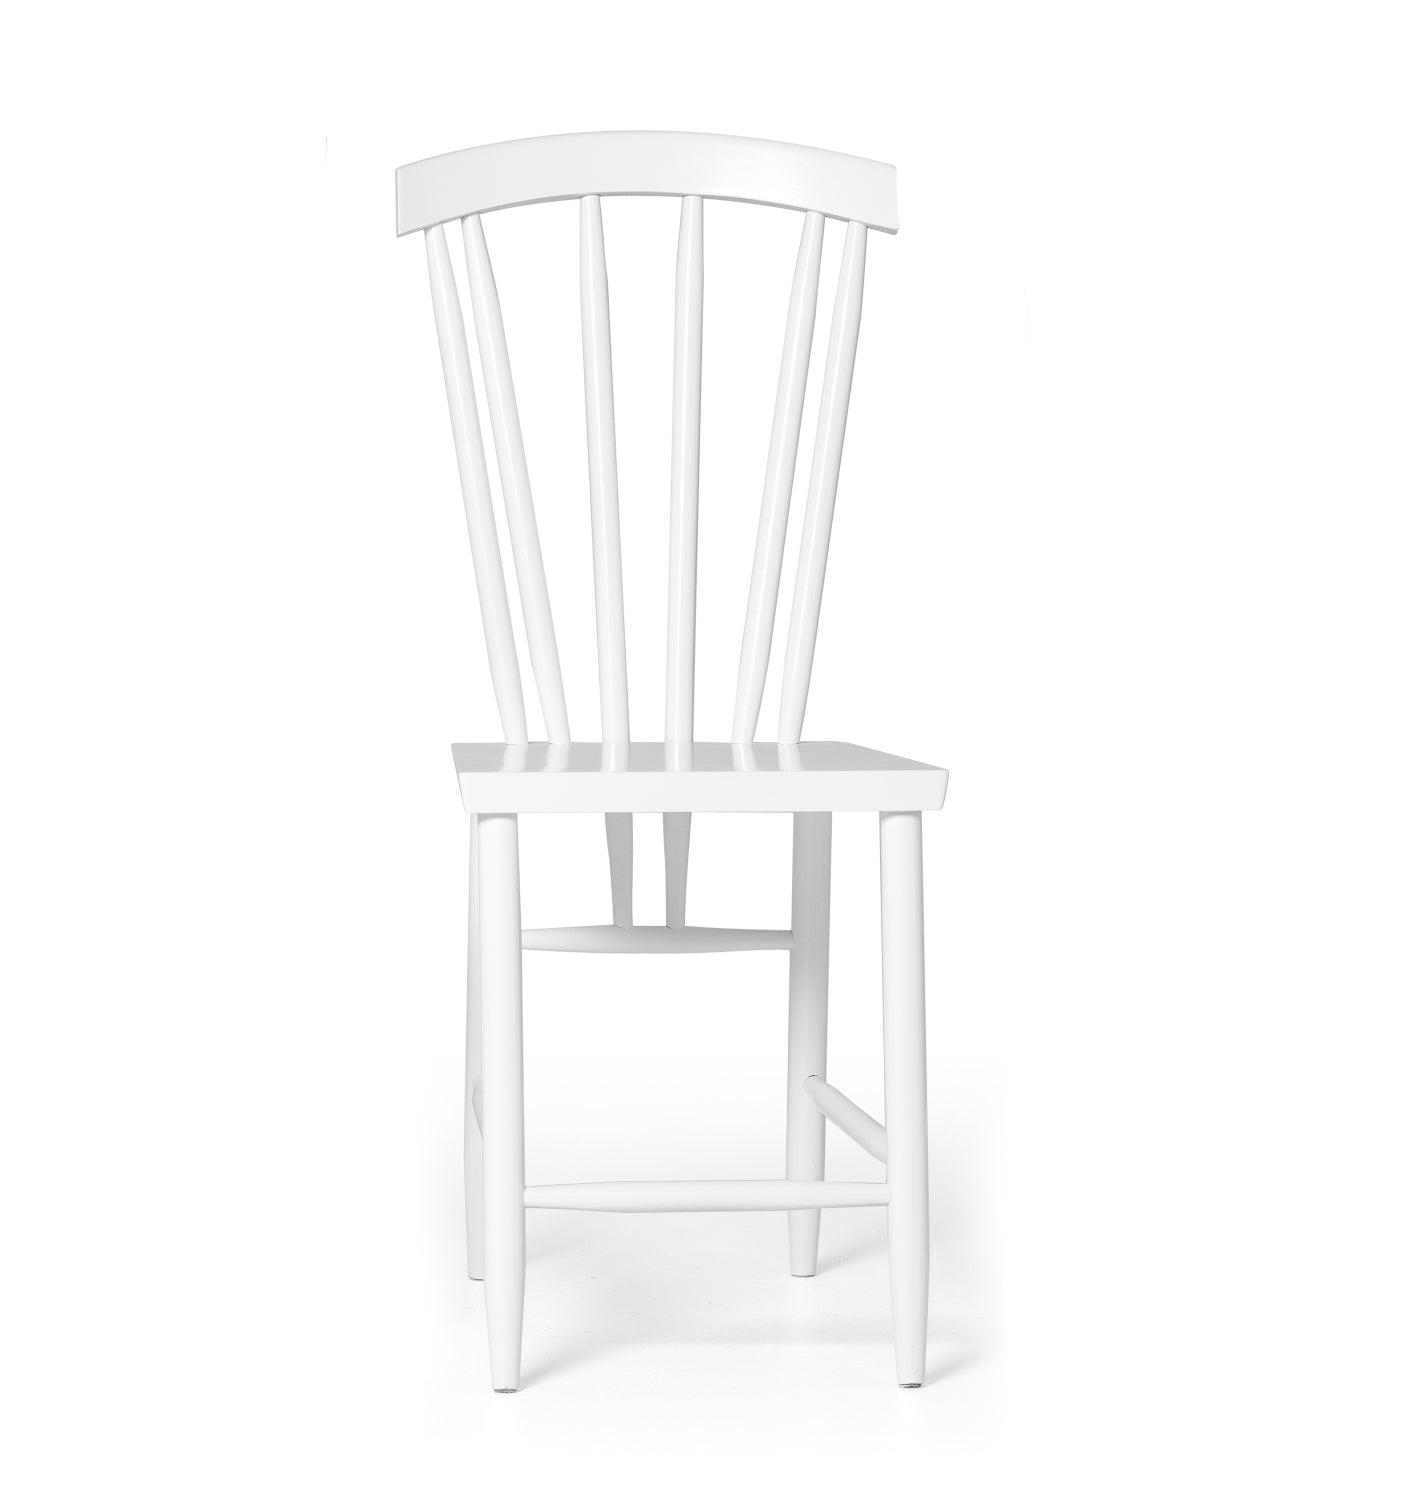 Family Chair 3. 1pc